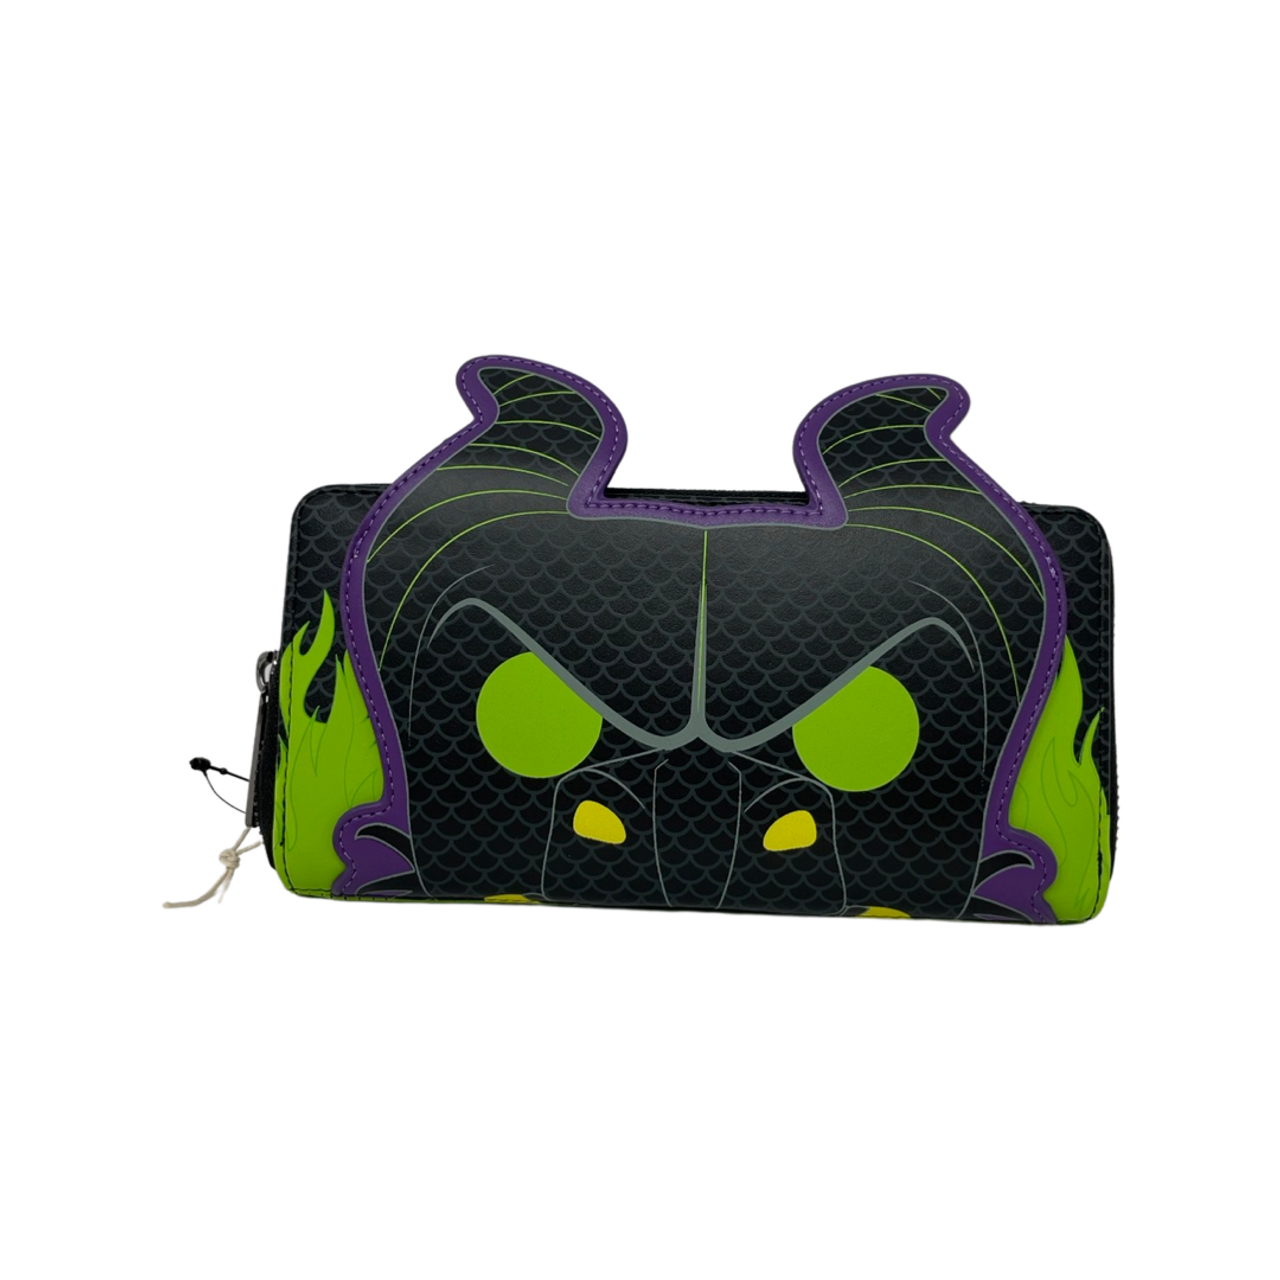 Maleficent Loungefly Backpack  Maleficent Disney Backpack - Anime  Backpacks, Wallets & Luggage - Aliexpress